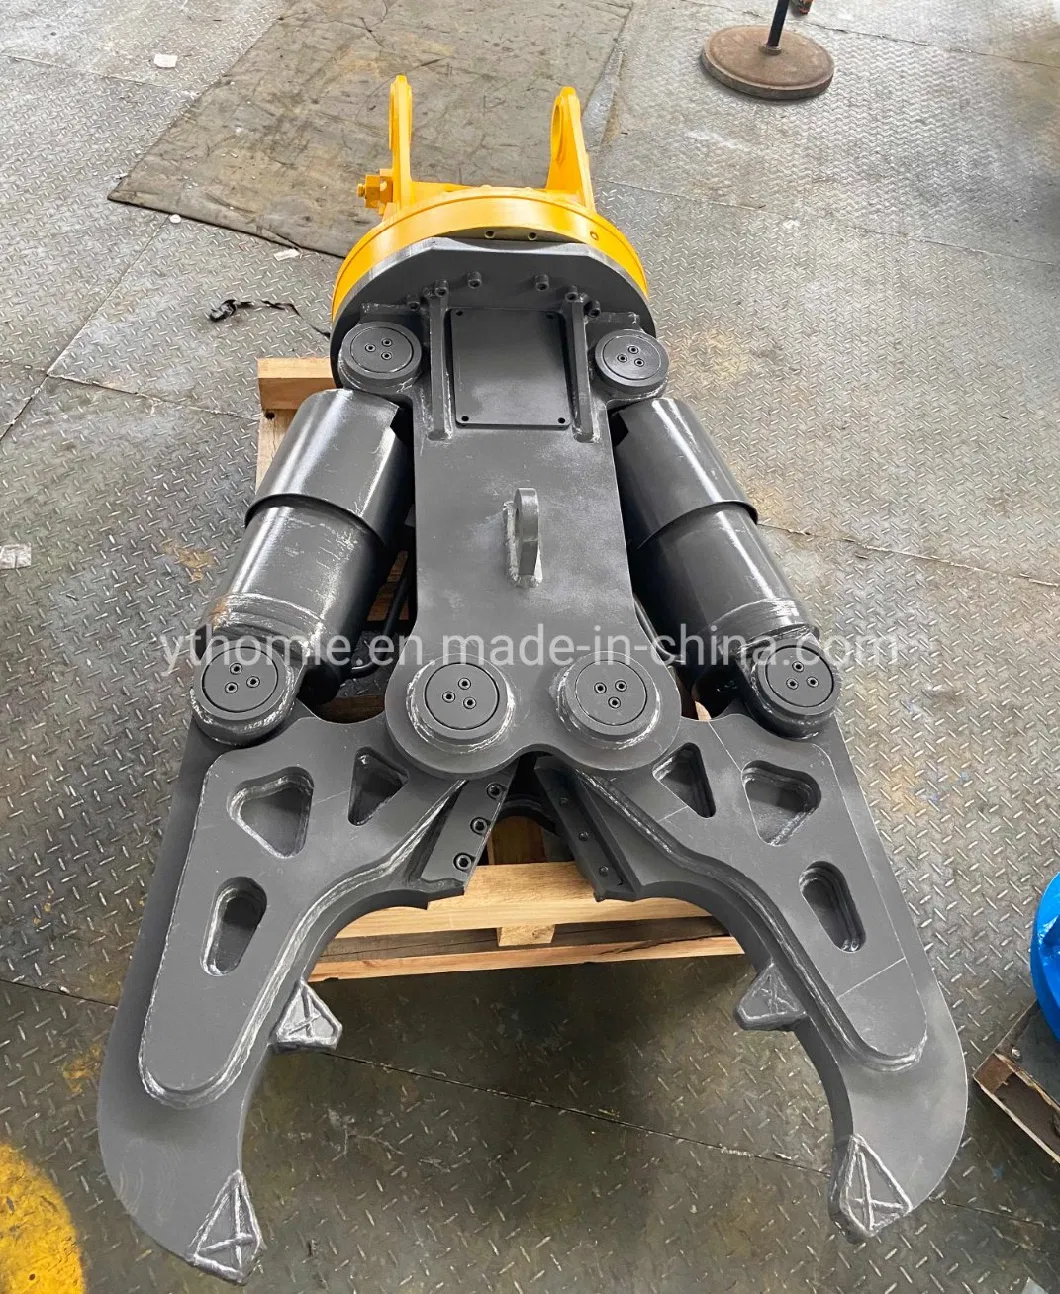 Chinese Manufacturer Hydraulic Shear Concrete Crusher for Excavator